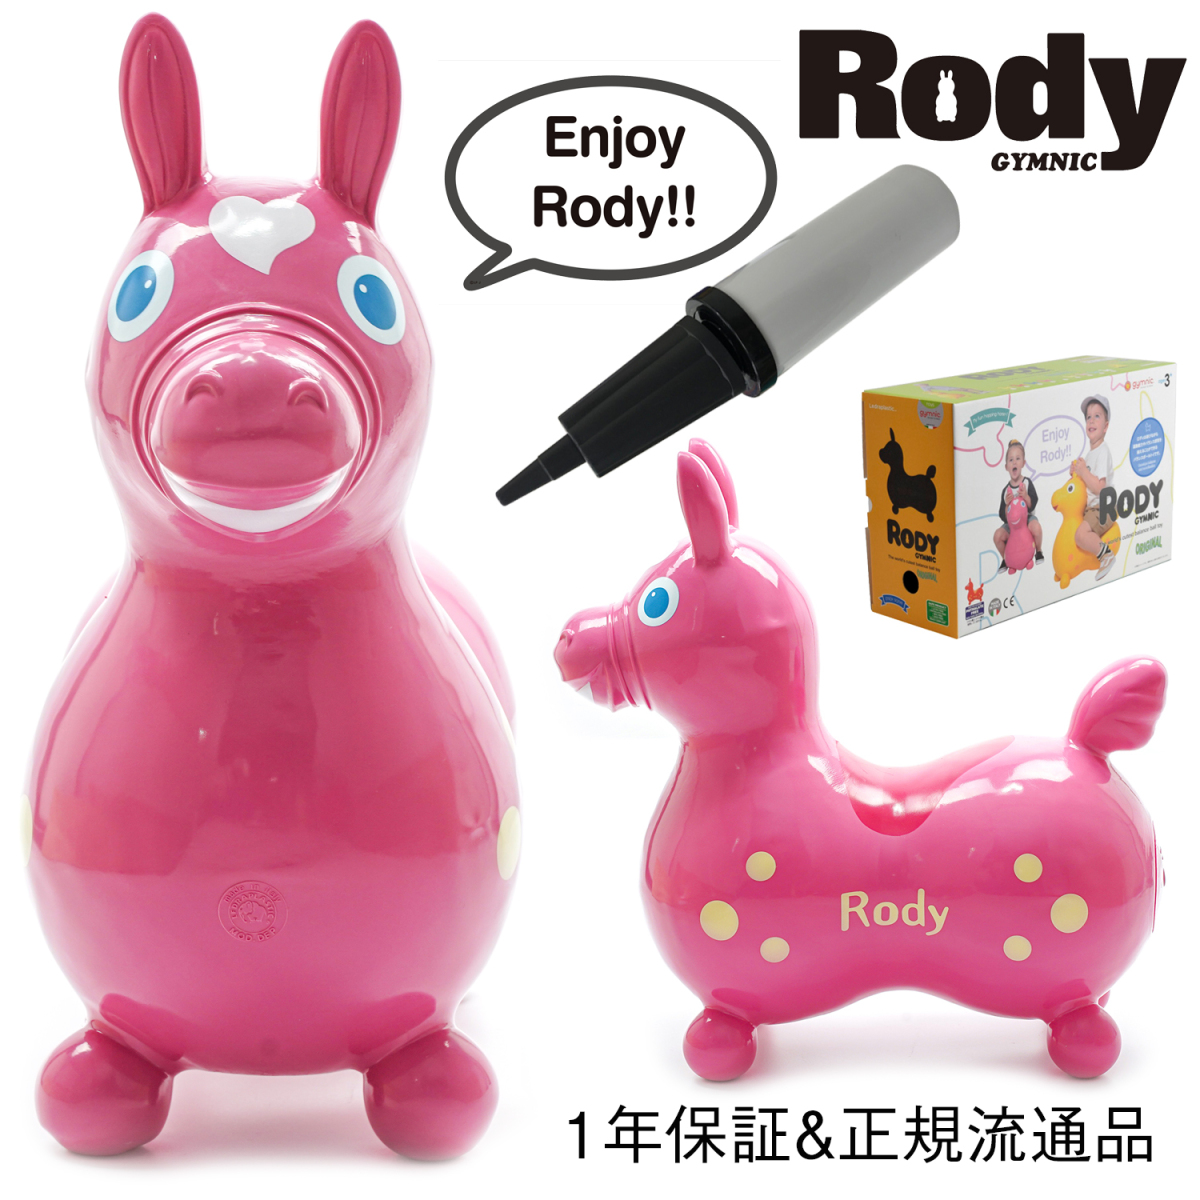 rotiRODY pink pump attaching non cover ru acid 1 year guarantee regular goods paste thing toy gift toy for riding interior horse riding playing man girl 2 -years old from 